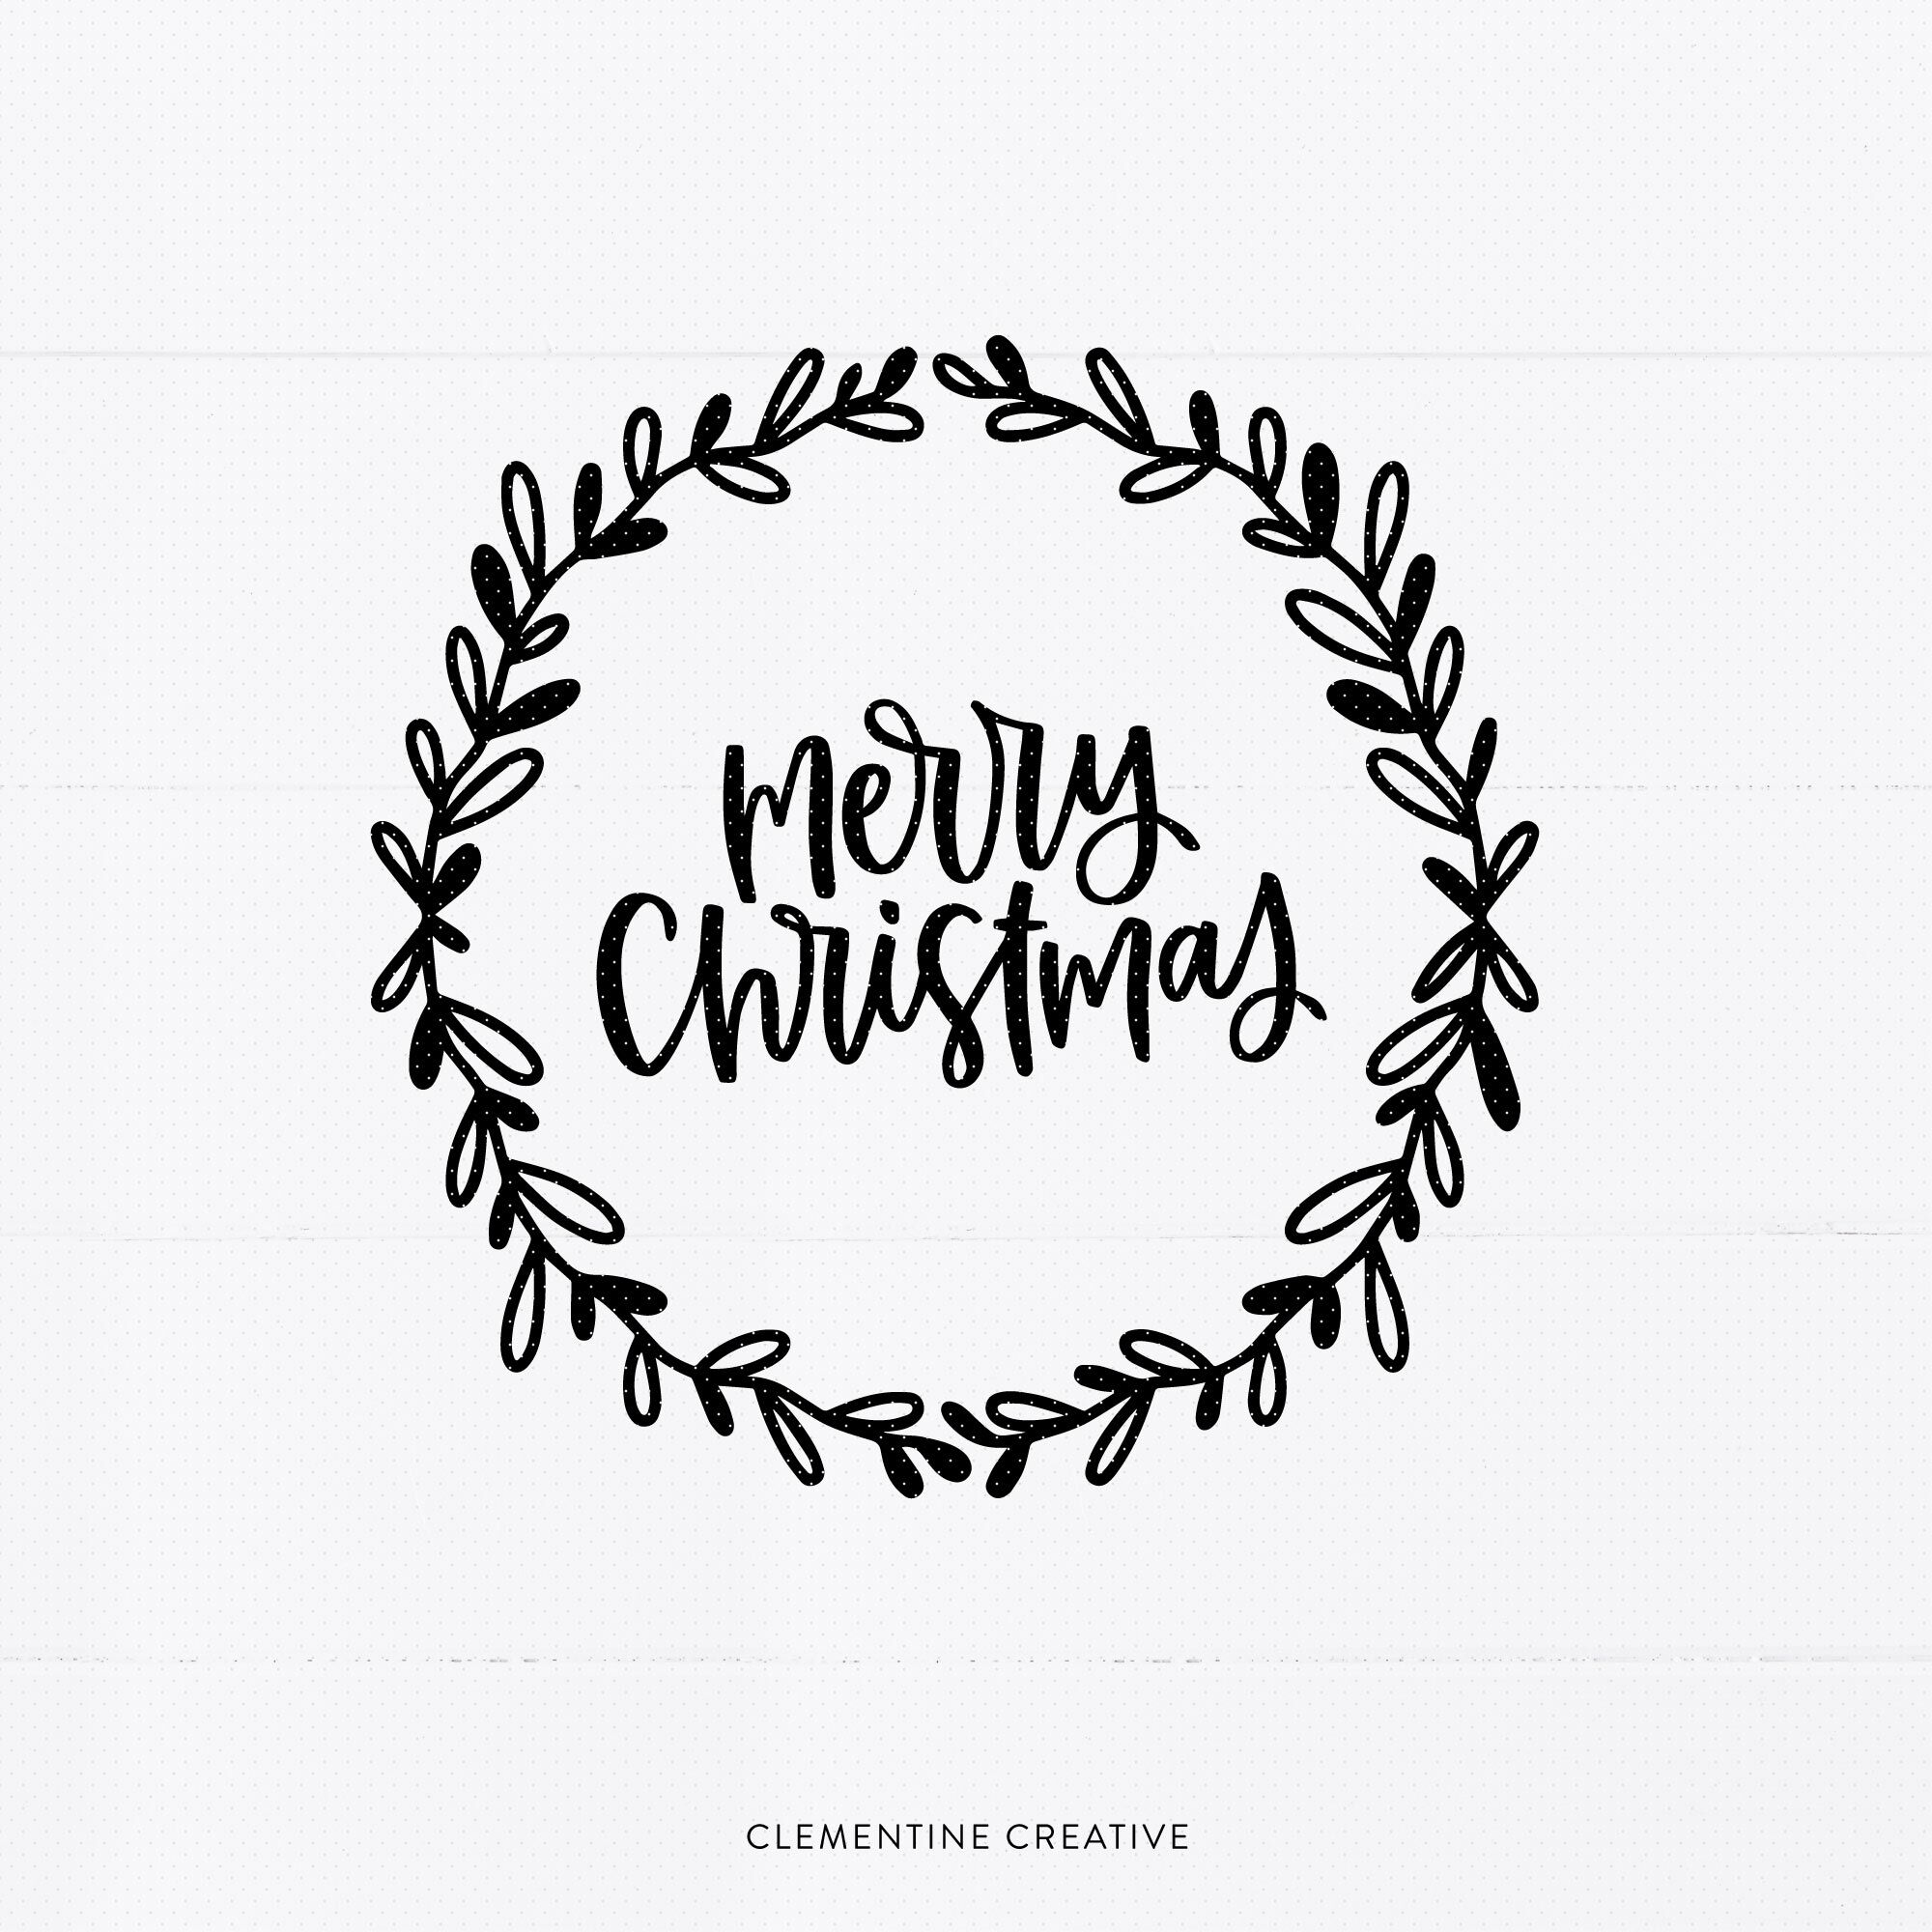 Download Merry Christmas Svg Christmas Clip Art Wreath Svg By Clementine Creative Thehungryjpeg Com